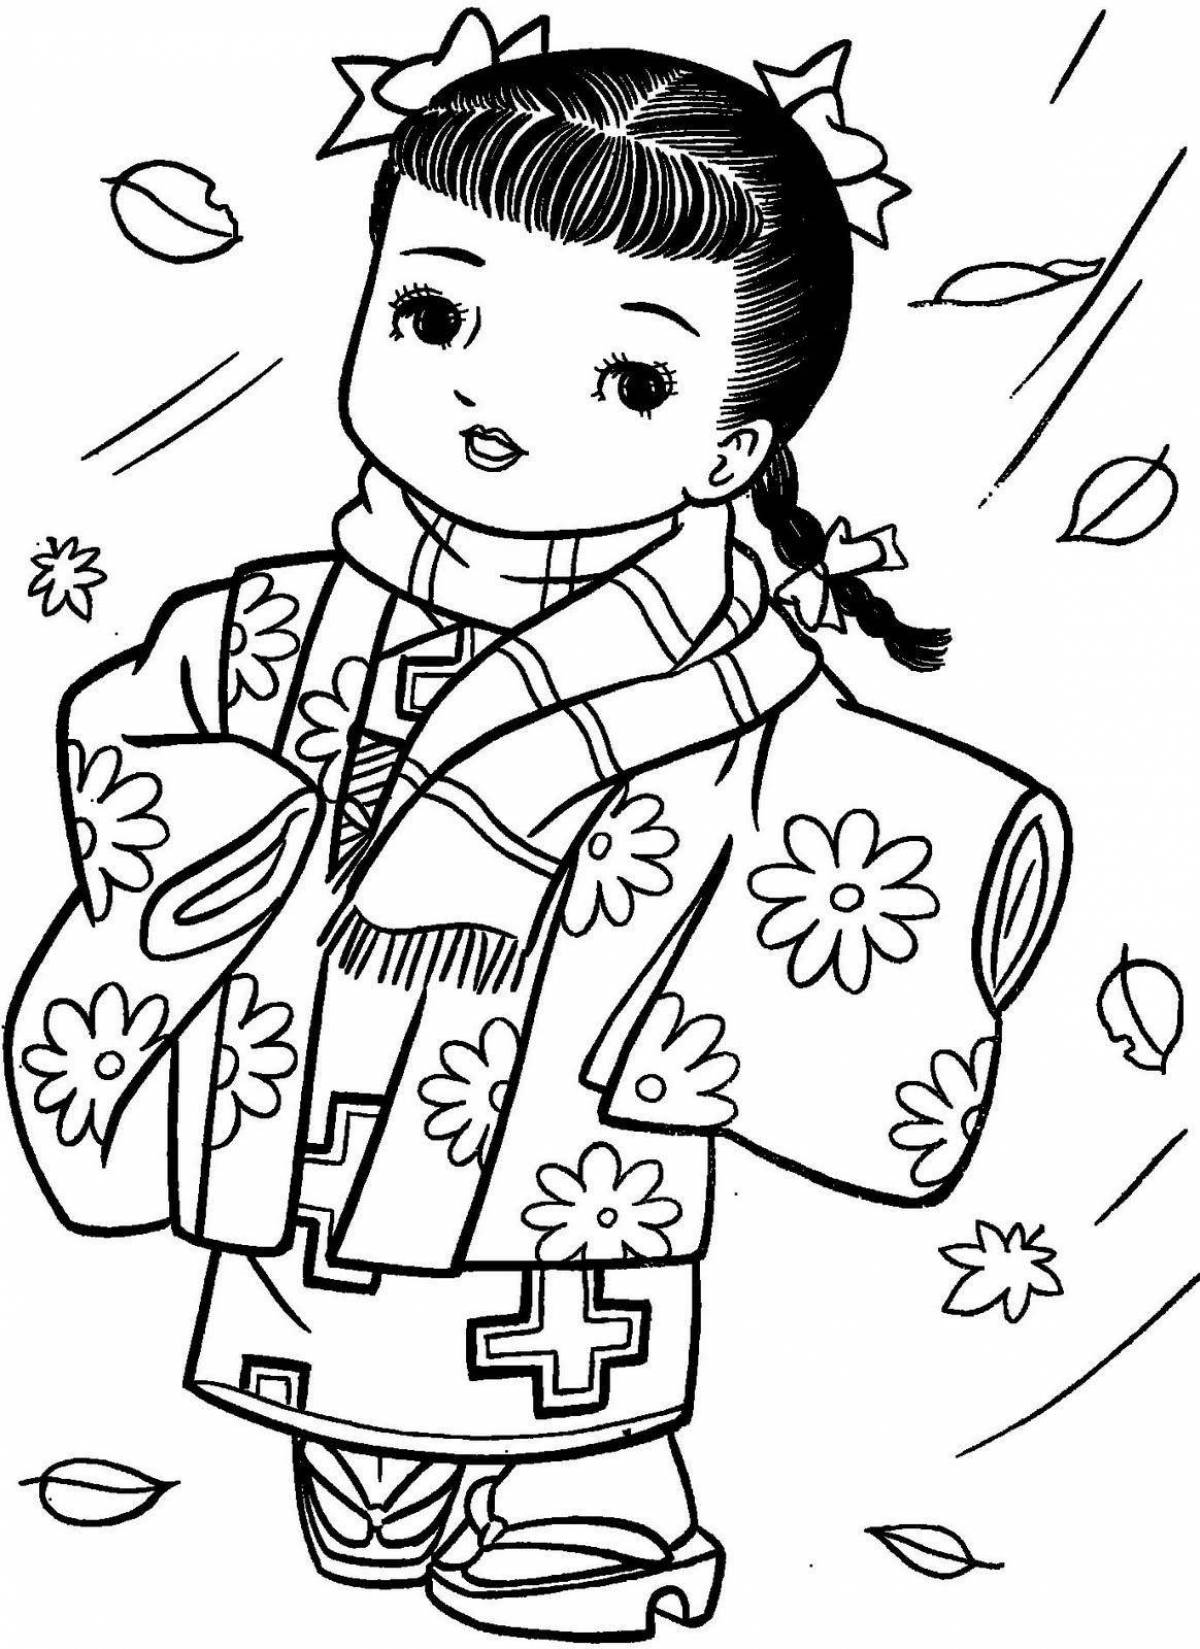 Coloring book shining Chinese woman